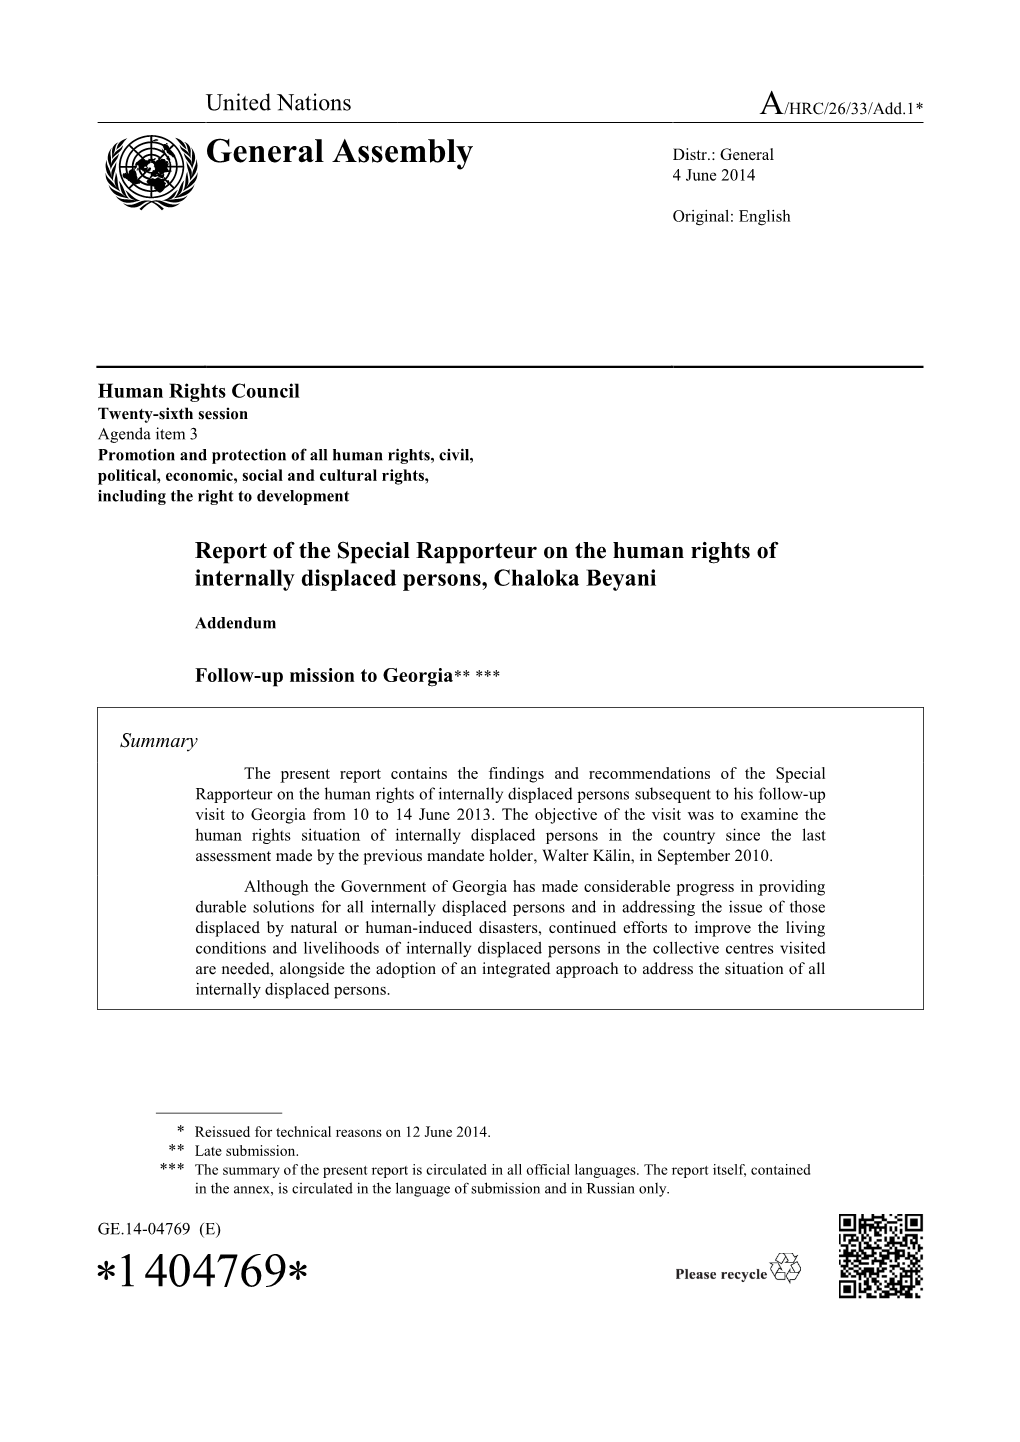 Report of the Special Rapporteur on the Human Rights of Internally Displaced Persons, Chaloka Beyani